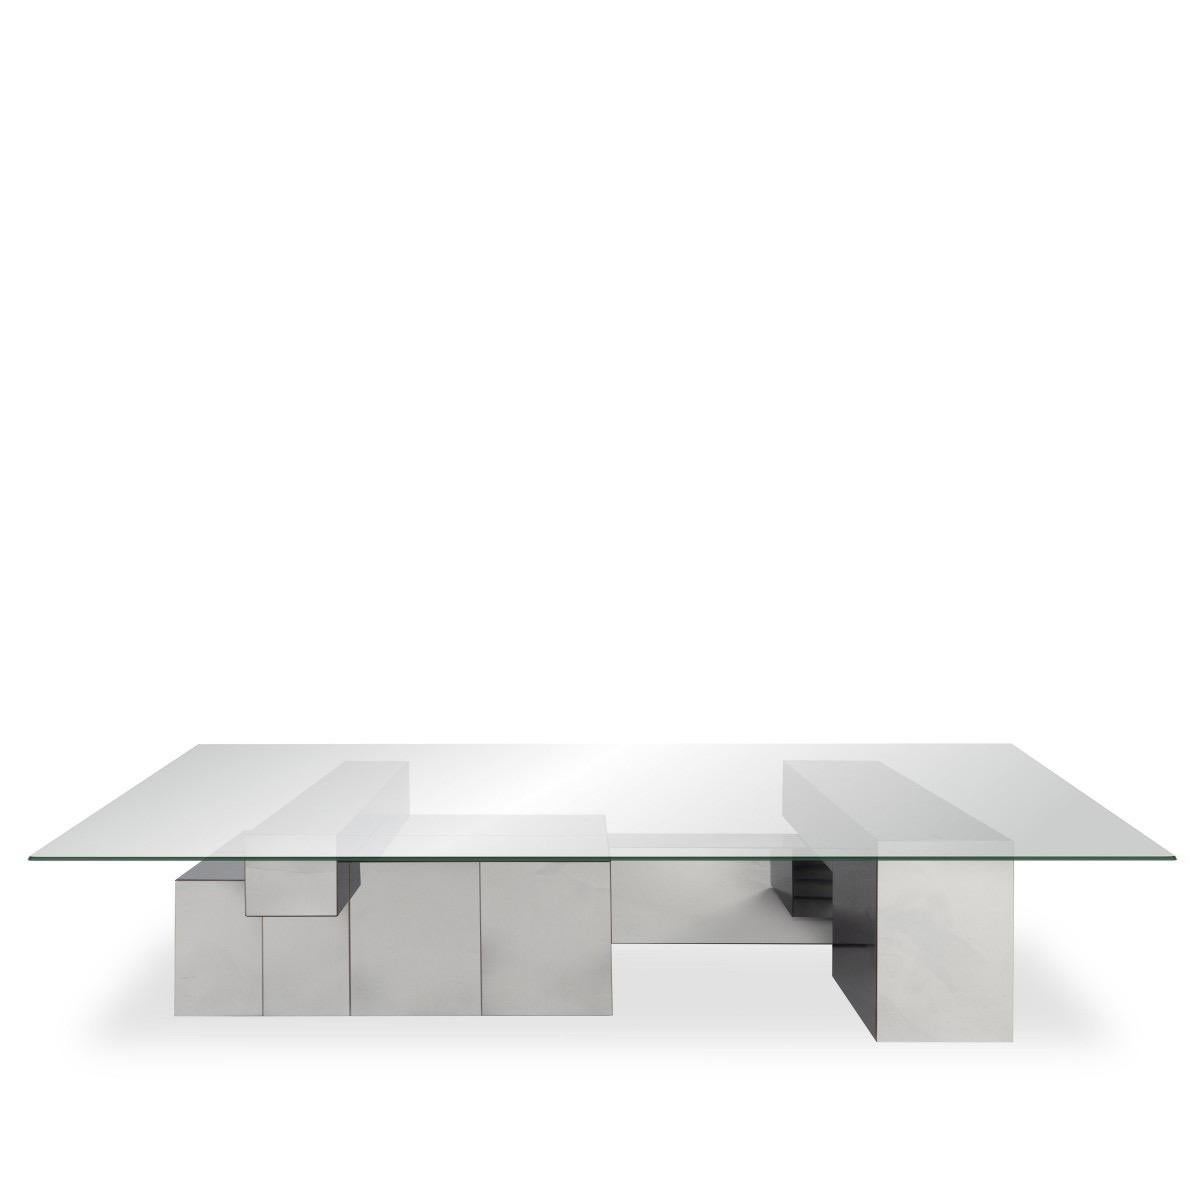 A Cityscape sculptural metal and glass topped coffee table. Unsigned. USA, circa 1970. 

Dimensions of glass top: 80 inches L × 36 inches W
Height of overall table: 16 inches

Description from original dealer at time of purchase; 